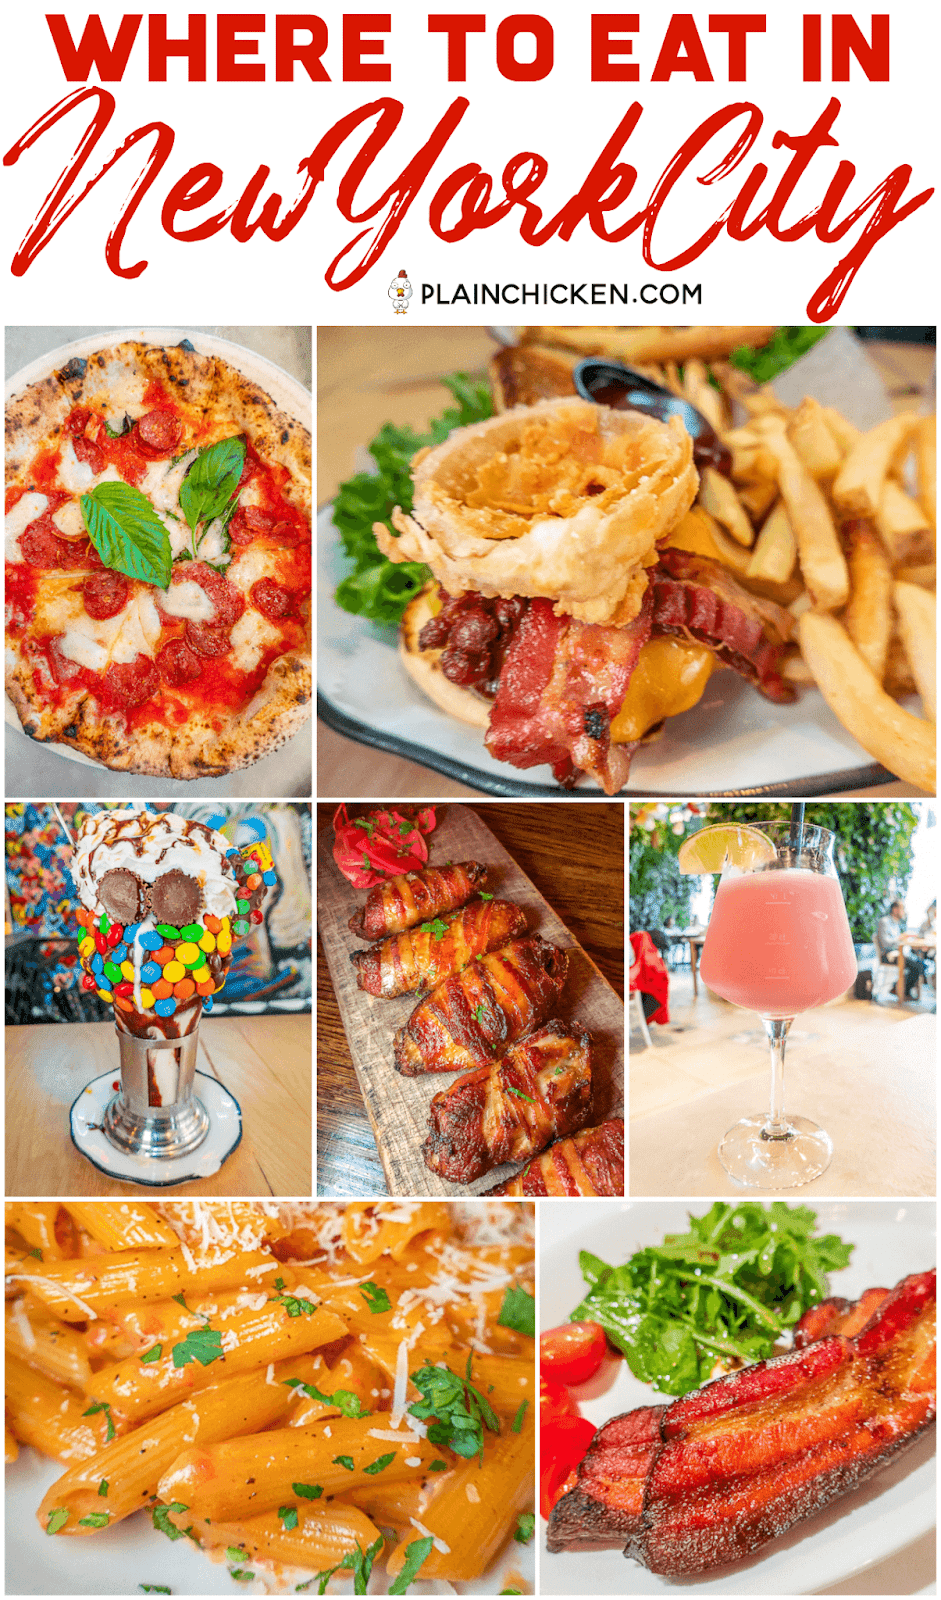 Where to Eat in NYC - six of our favorite places to eat in New York City. Burgers, steaks, PIZZA, pasta and crazy milkshakes. Save this list for your next trip! #travel #nyc